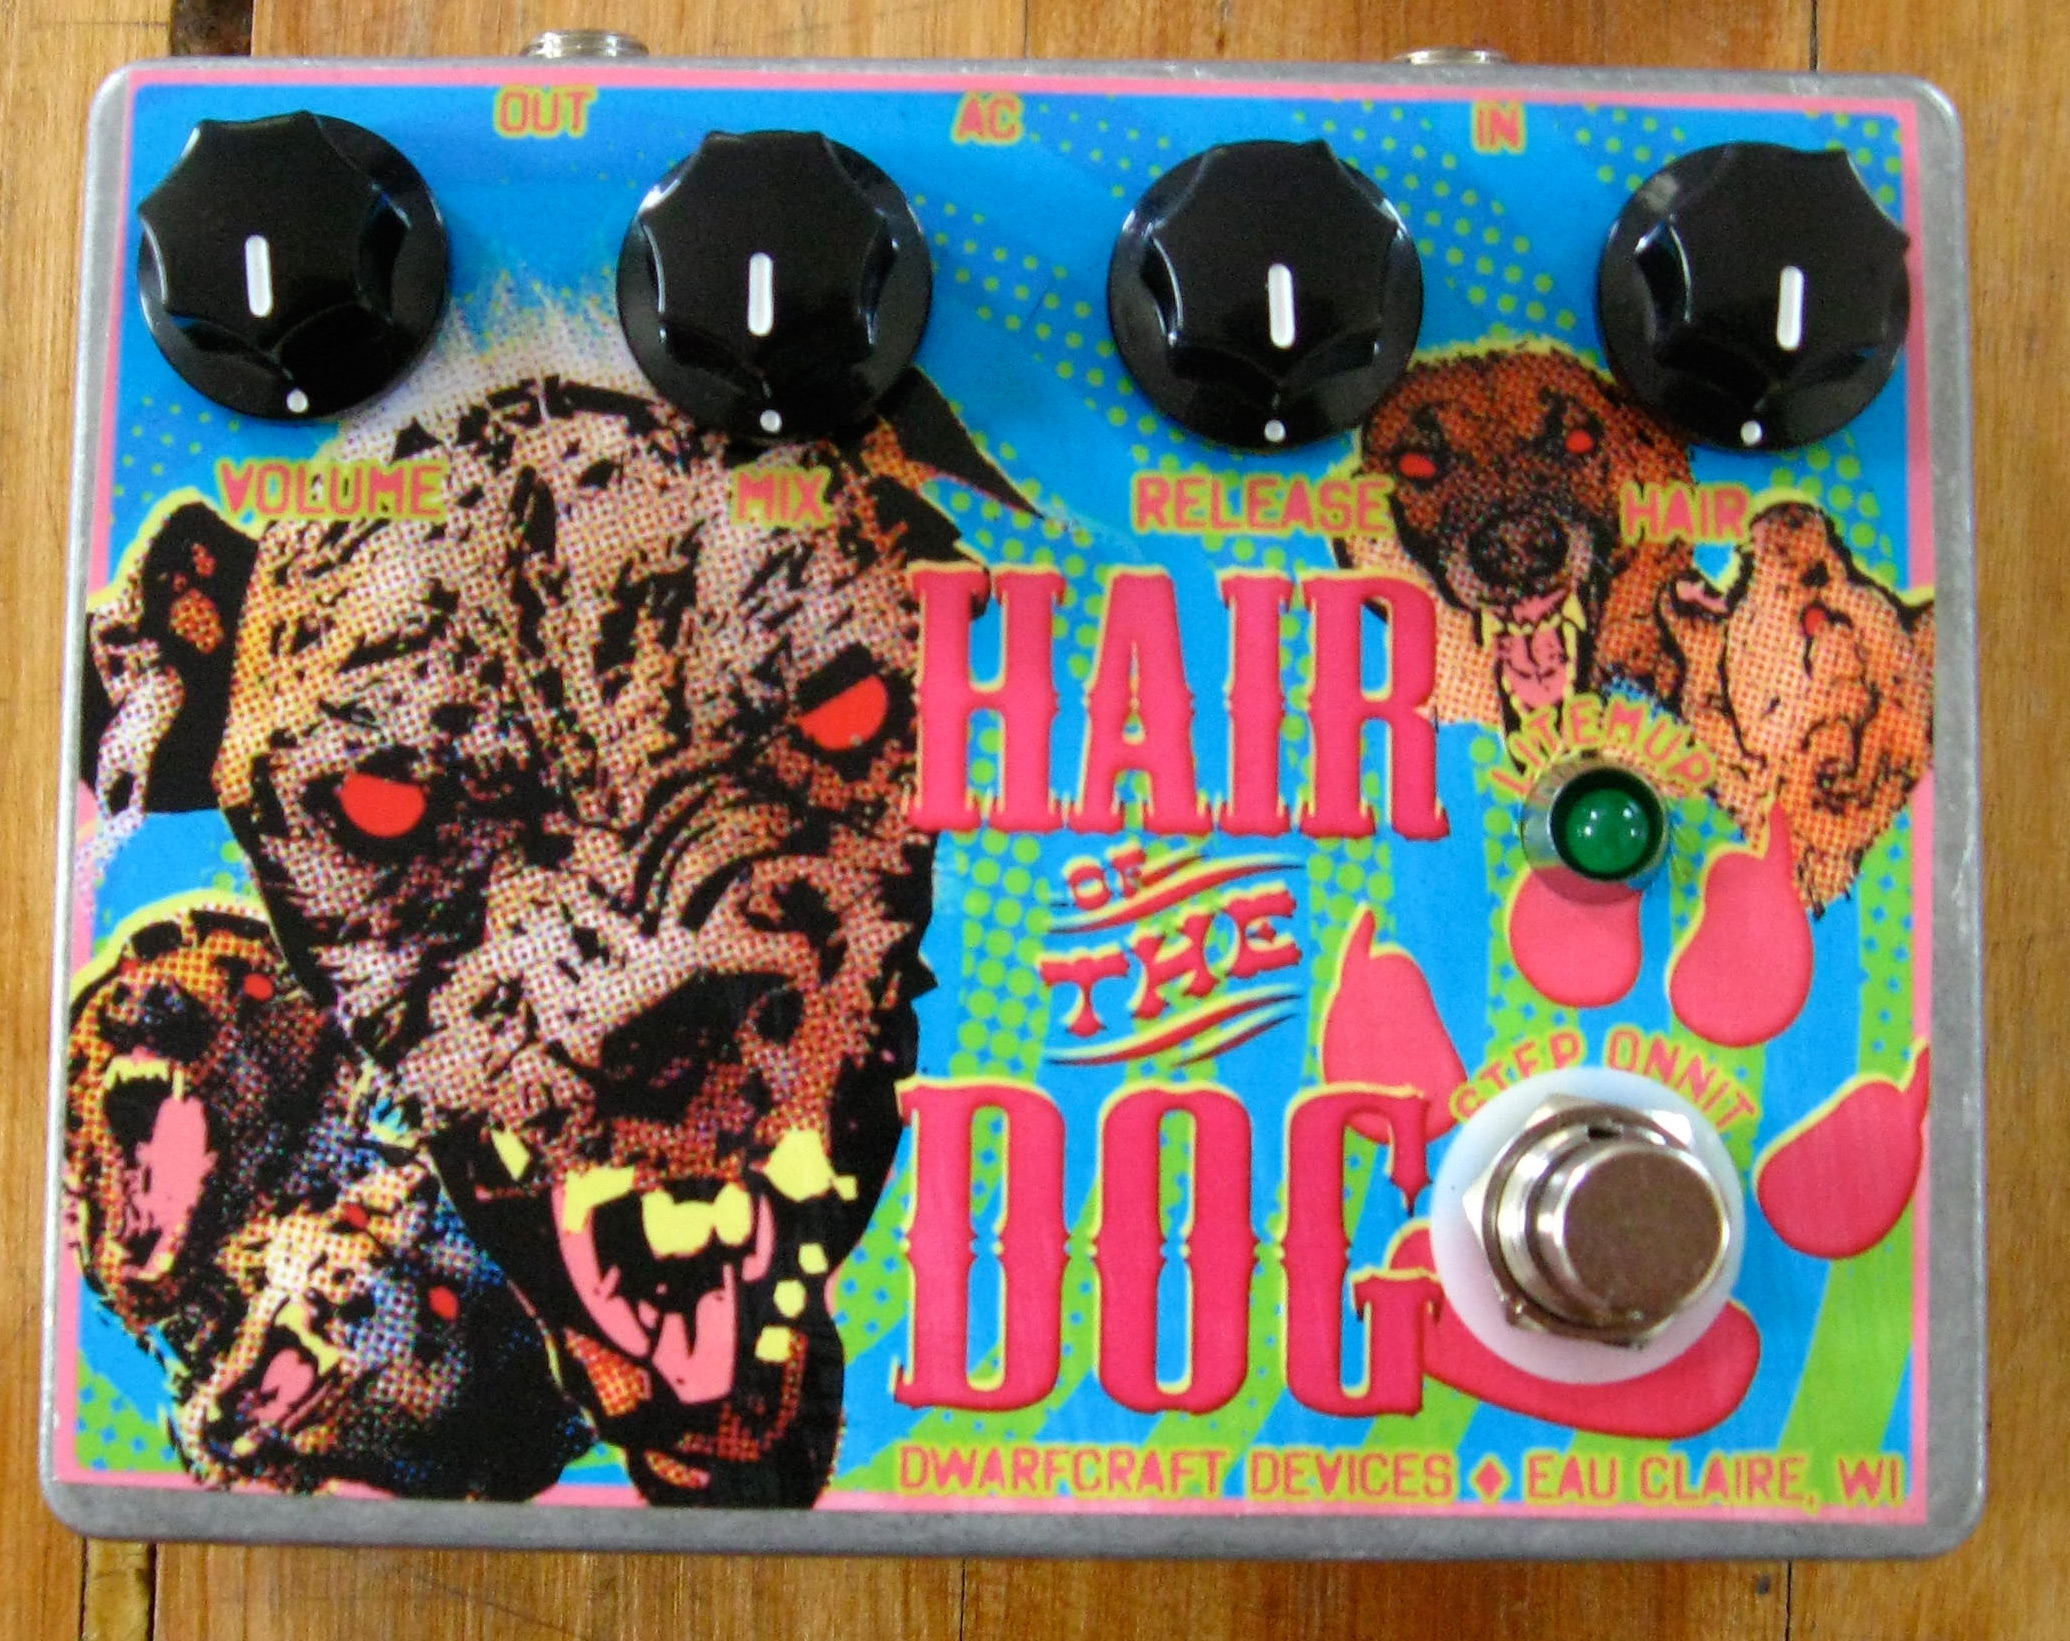 Dwarfcraft Devices Hair Of The Dog | Analogue Haven